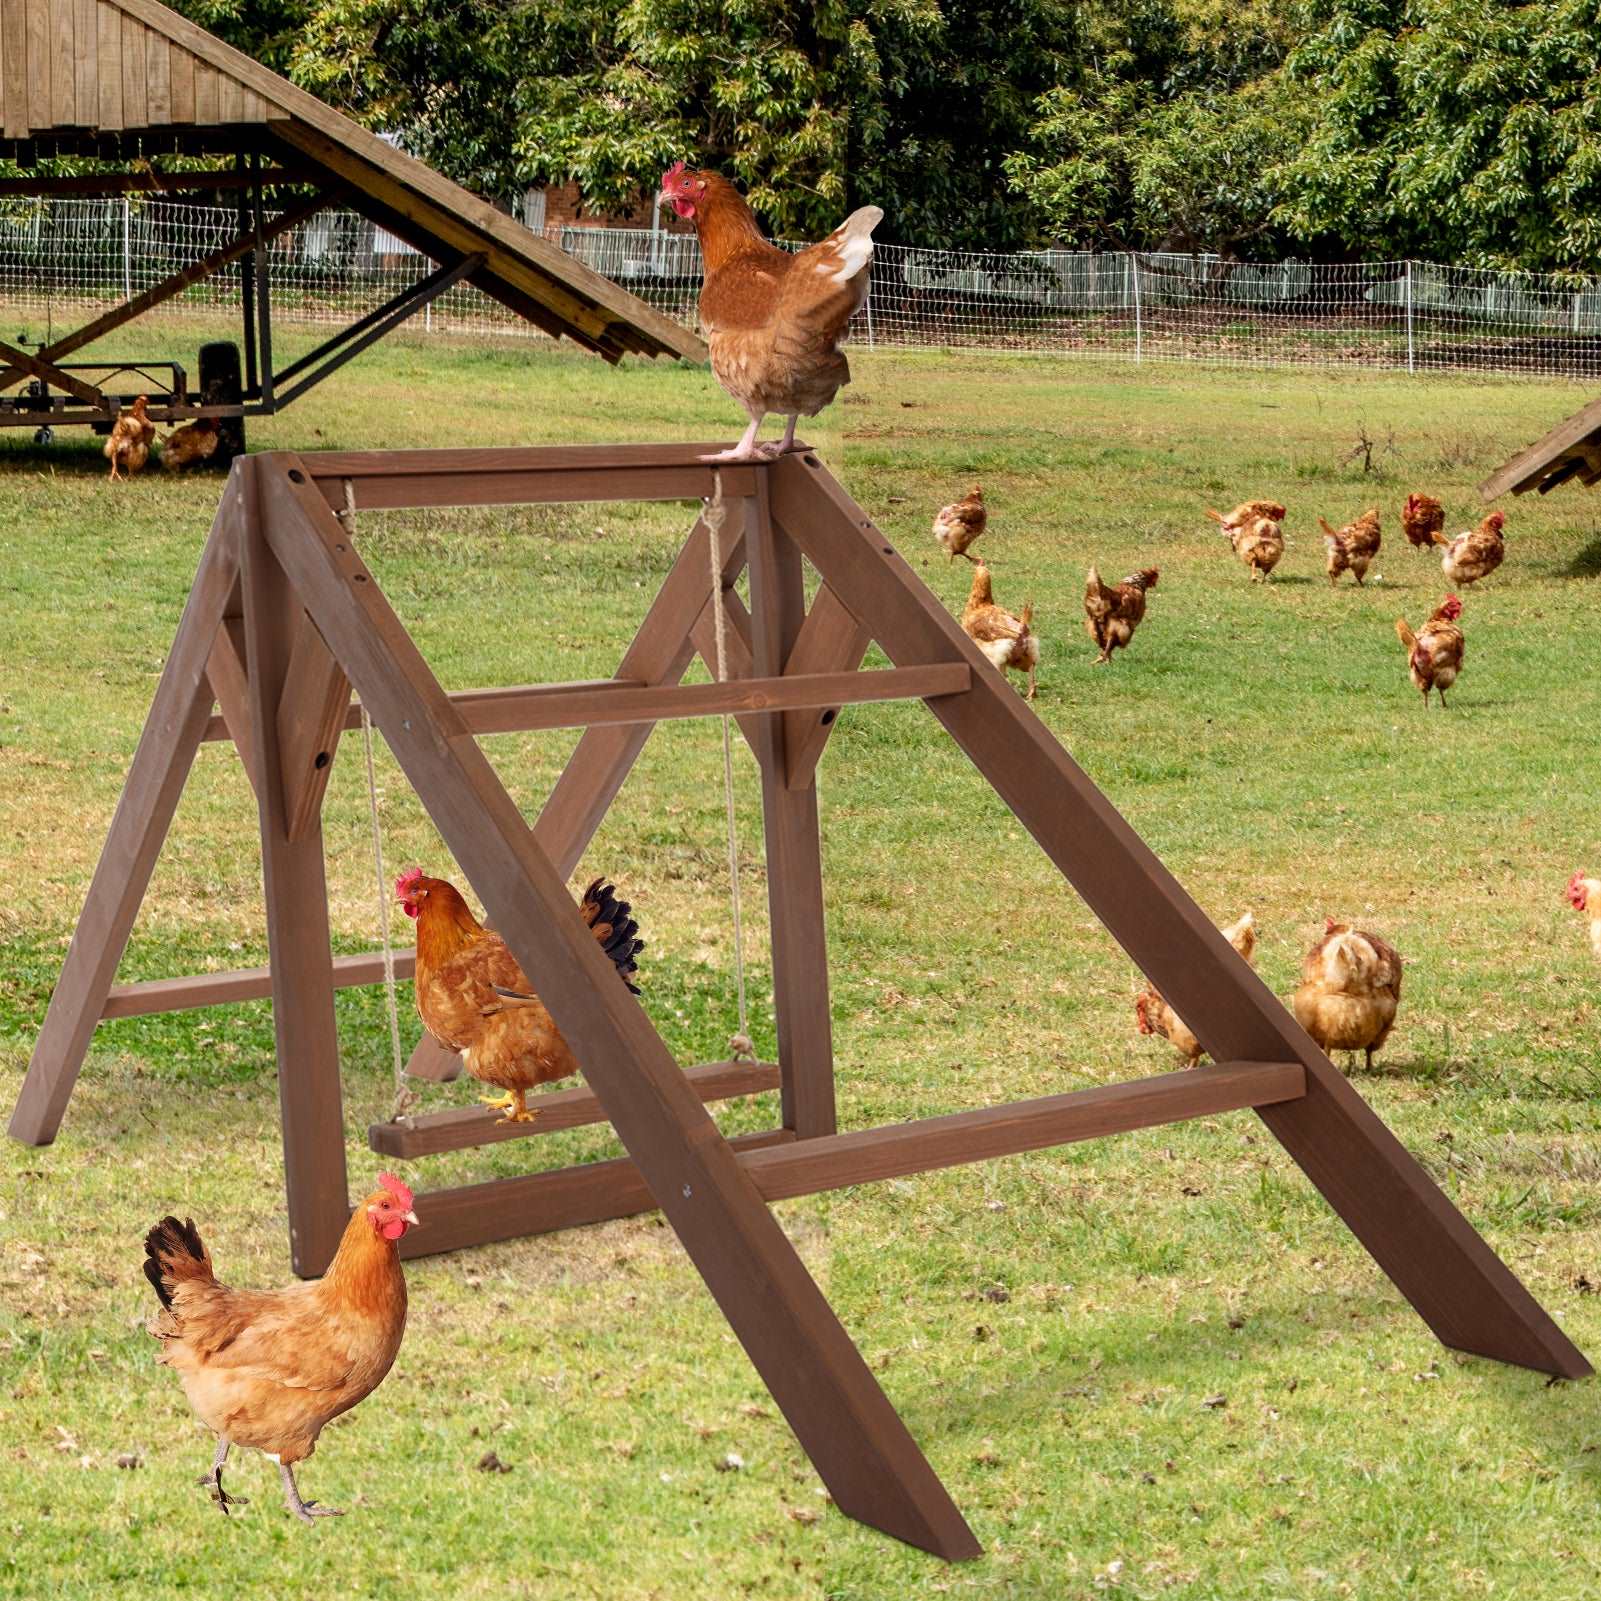 petsfit-chicken-toys-for-coop-accessories-5-chicken-perches-with-swing-are-perfect-for-8-10-chickens-wooden-chicken-ladder-for-pets-healthy-happy-06